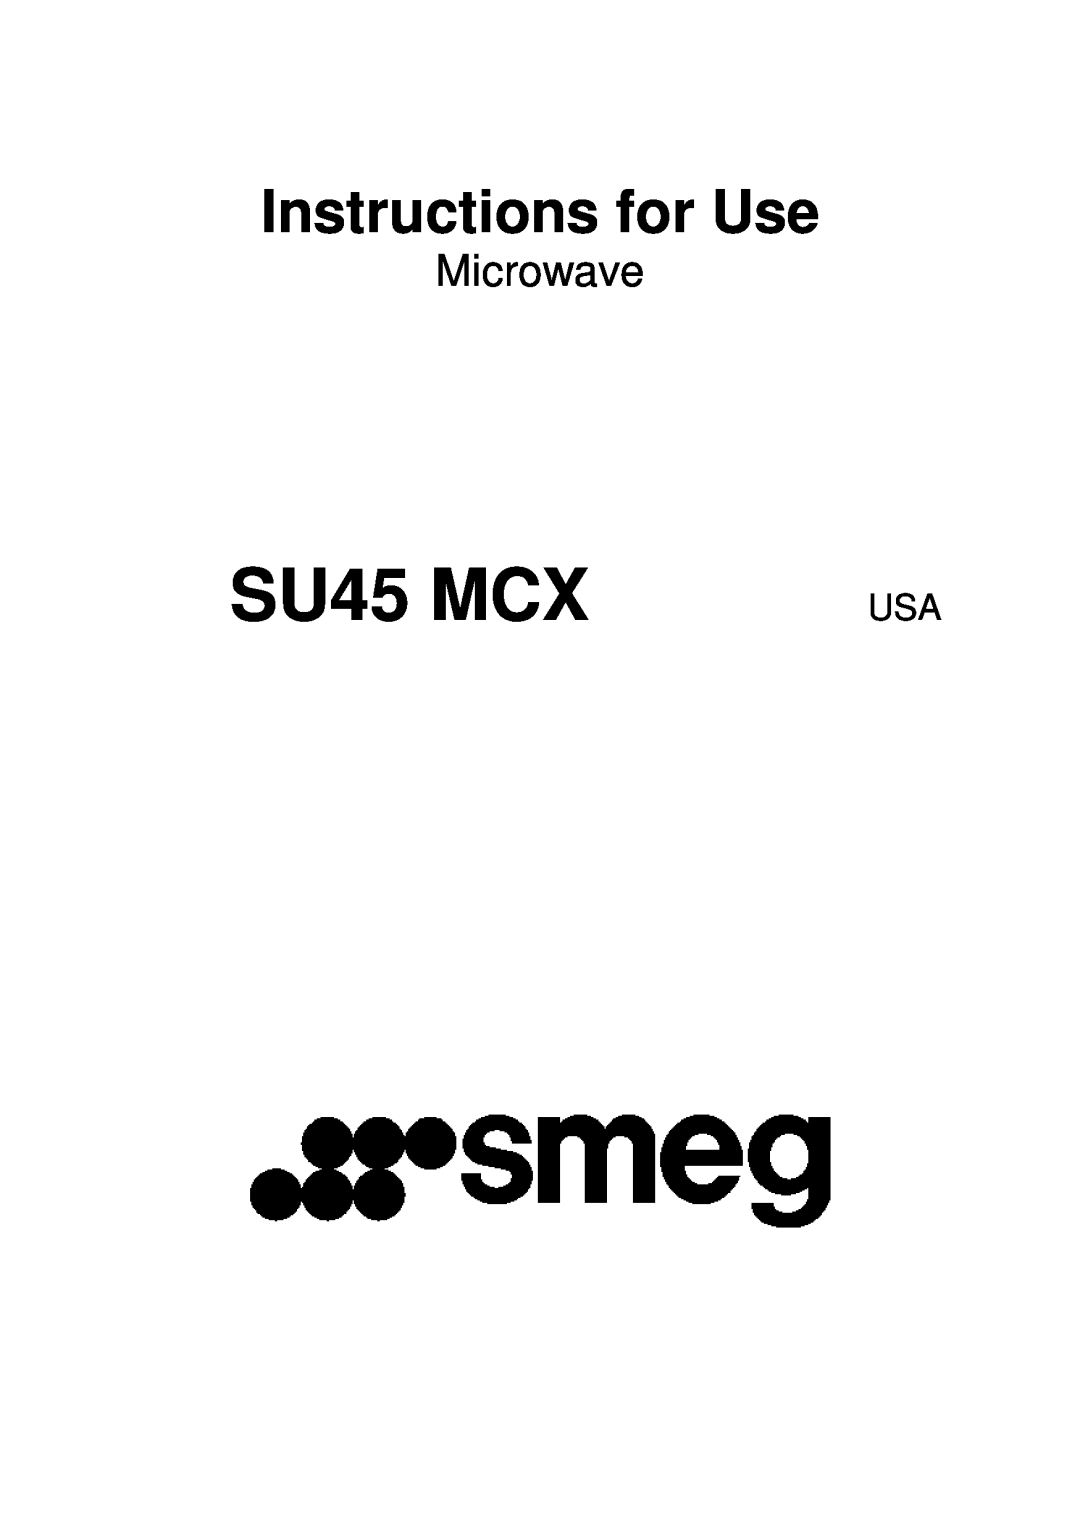 Smeg SU45 MCX manual Instructions for Use, Microwave 